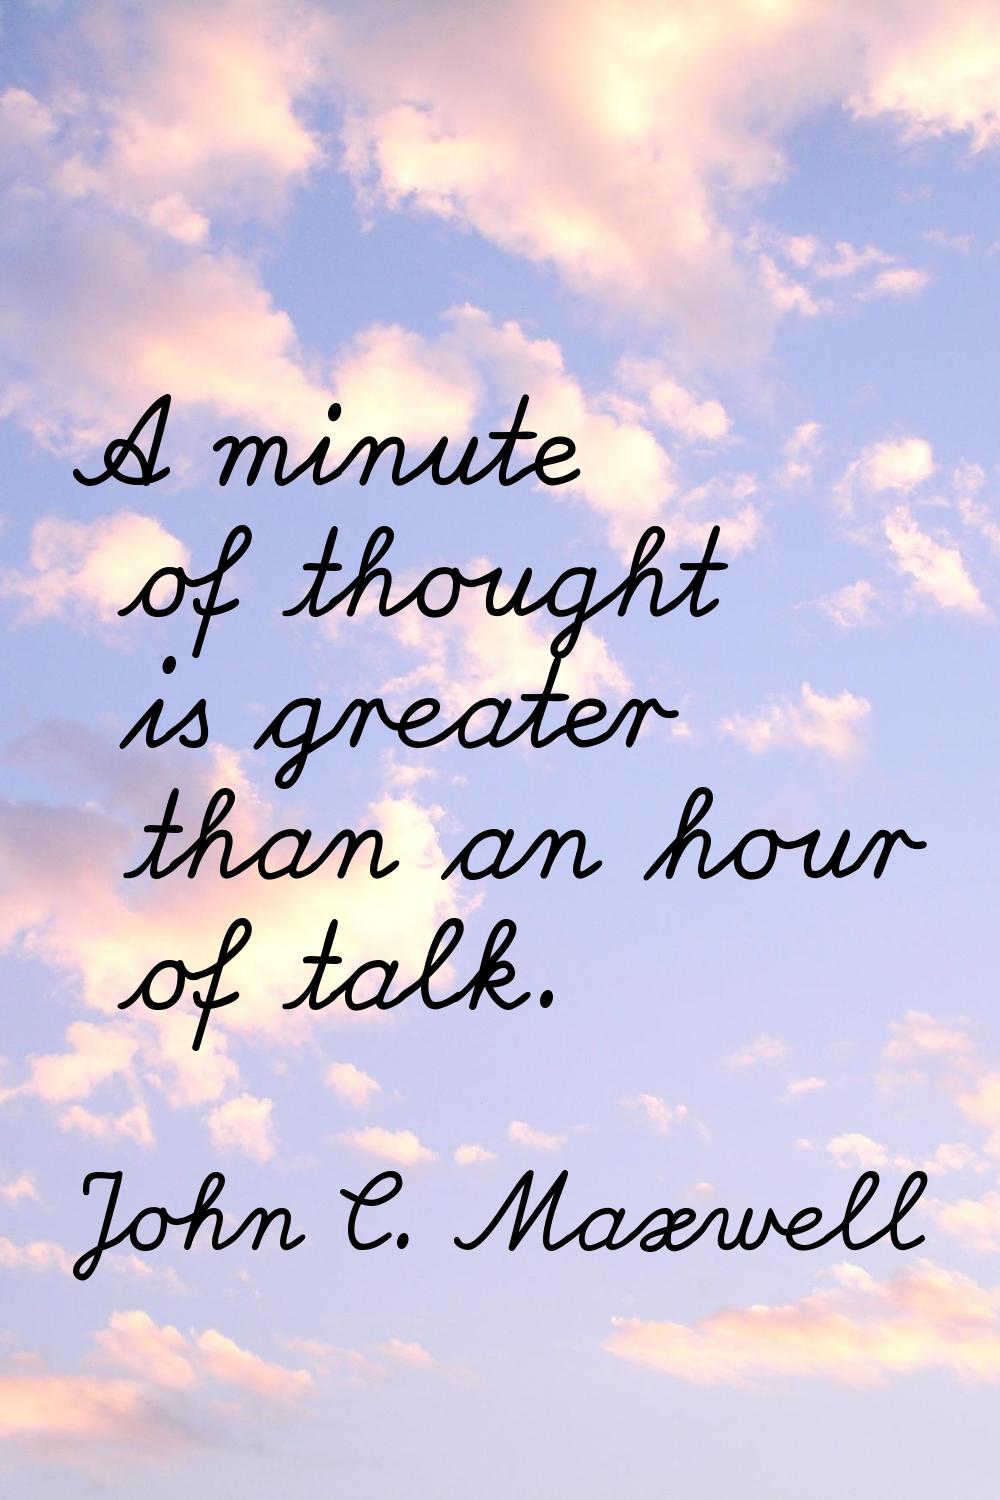 A minute of thought is greater than an hour of talk.